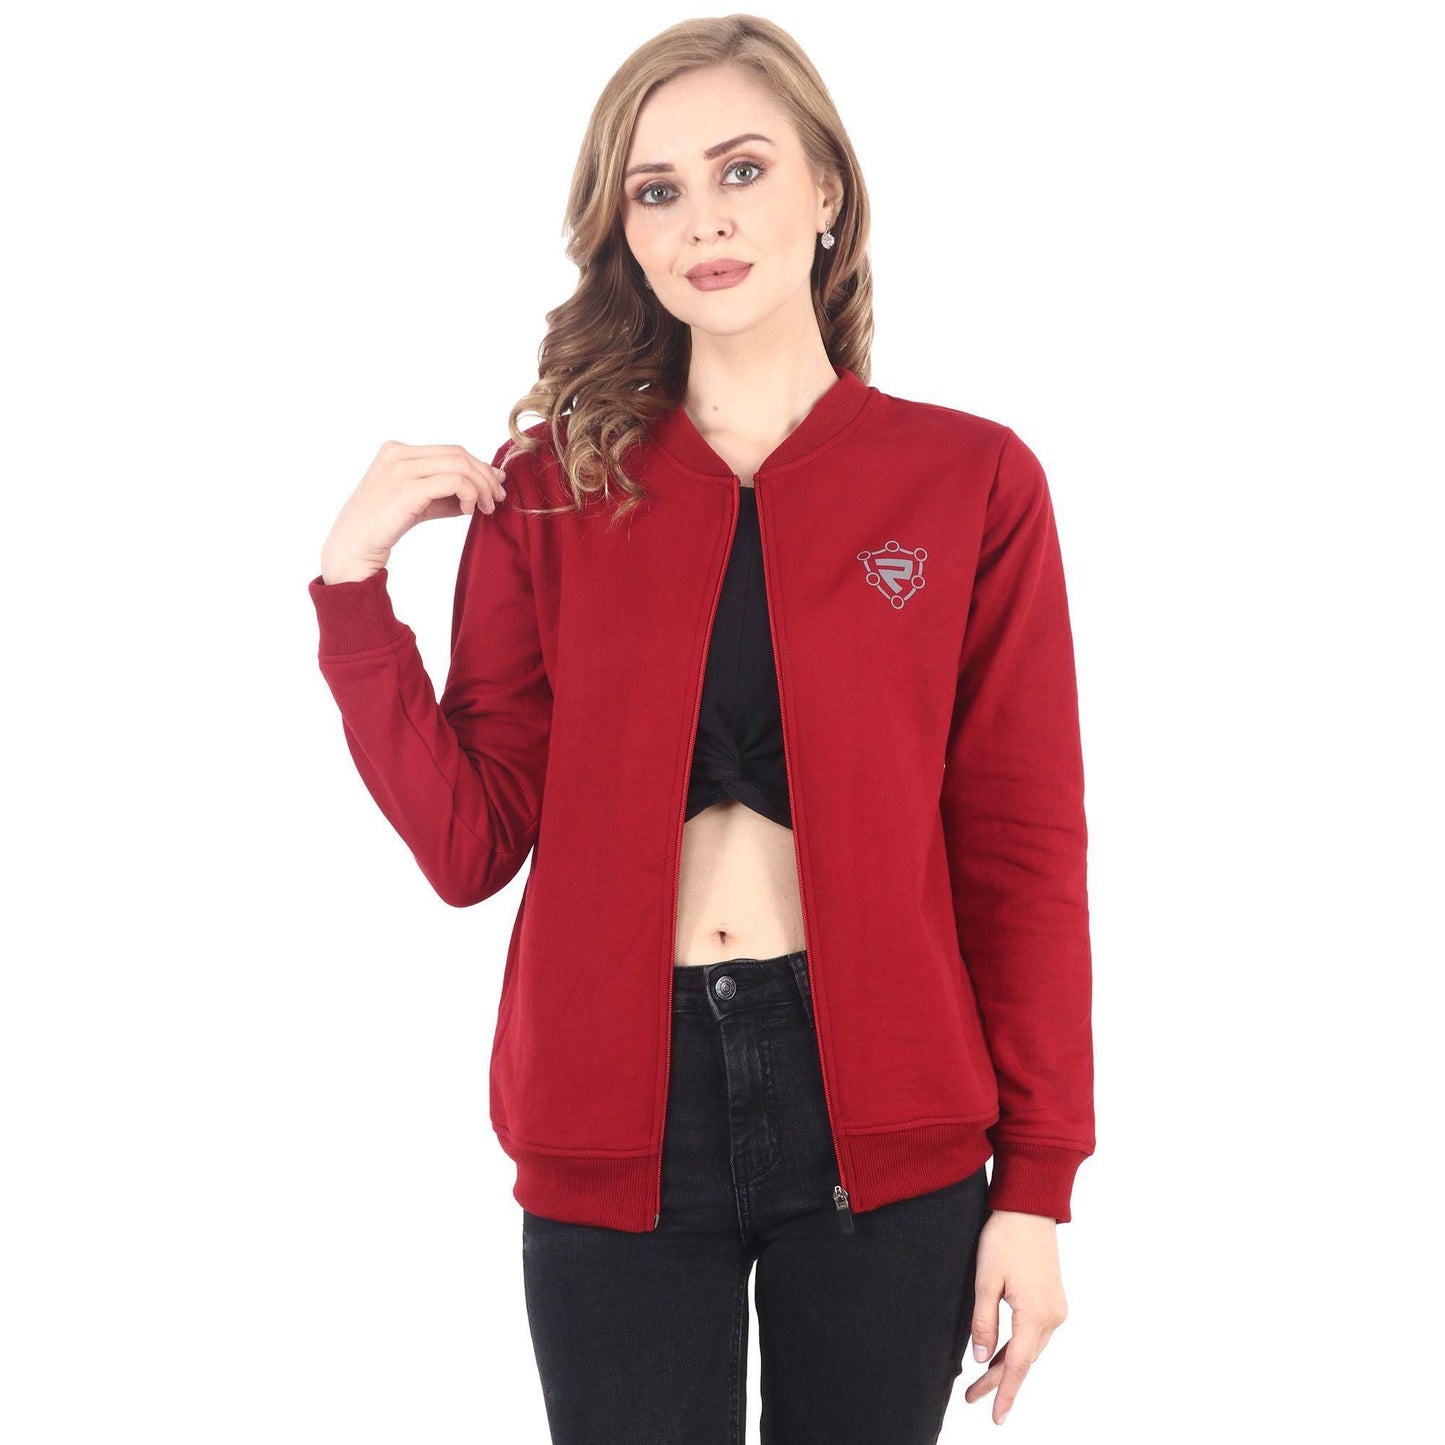 Women's Jacket For Daily Wear, Sports, Party, Shopping, Vacation